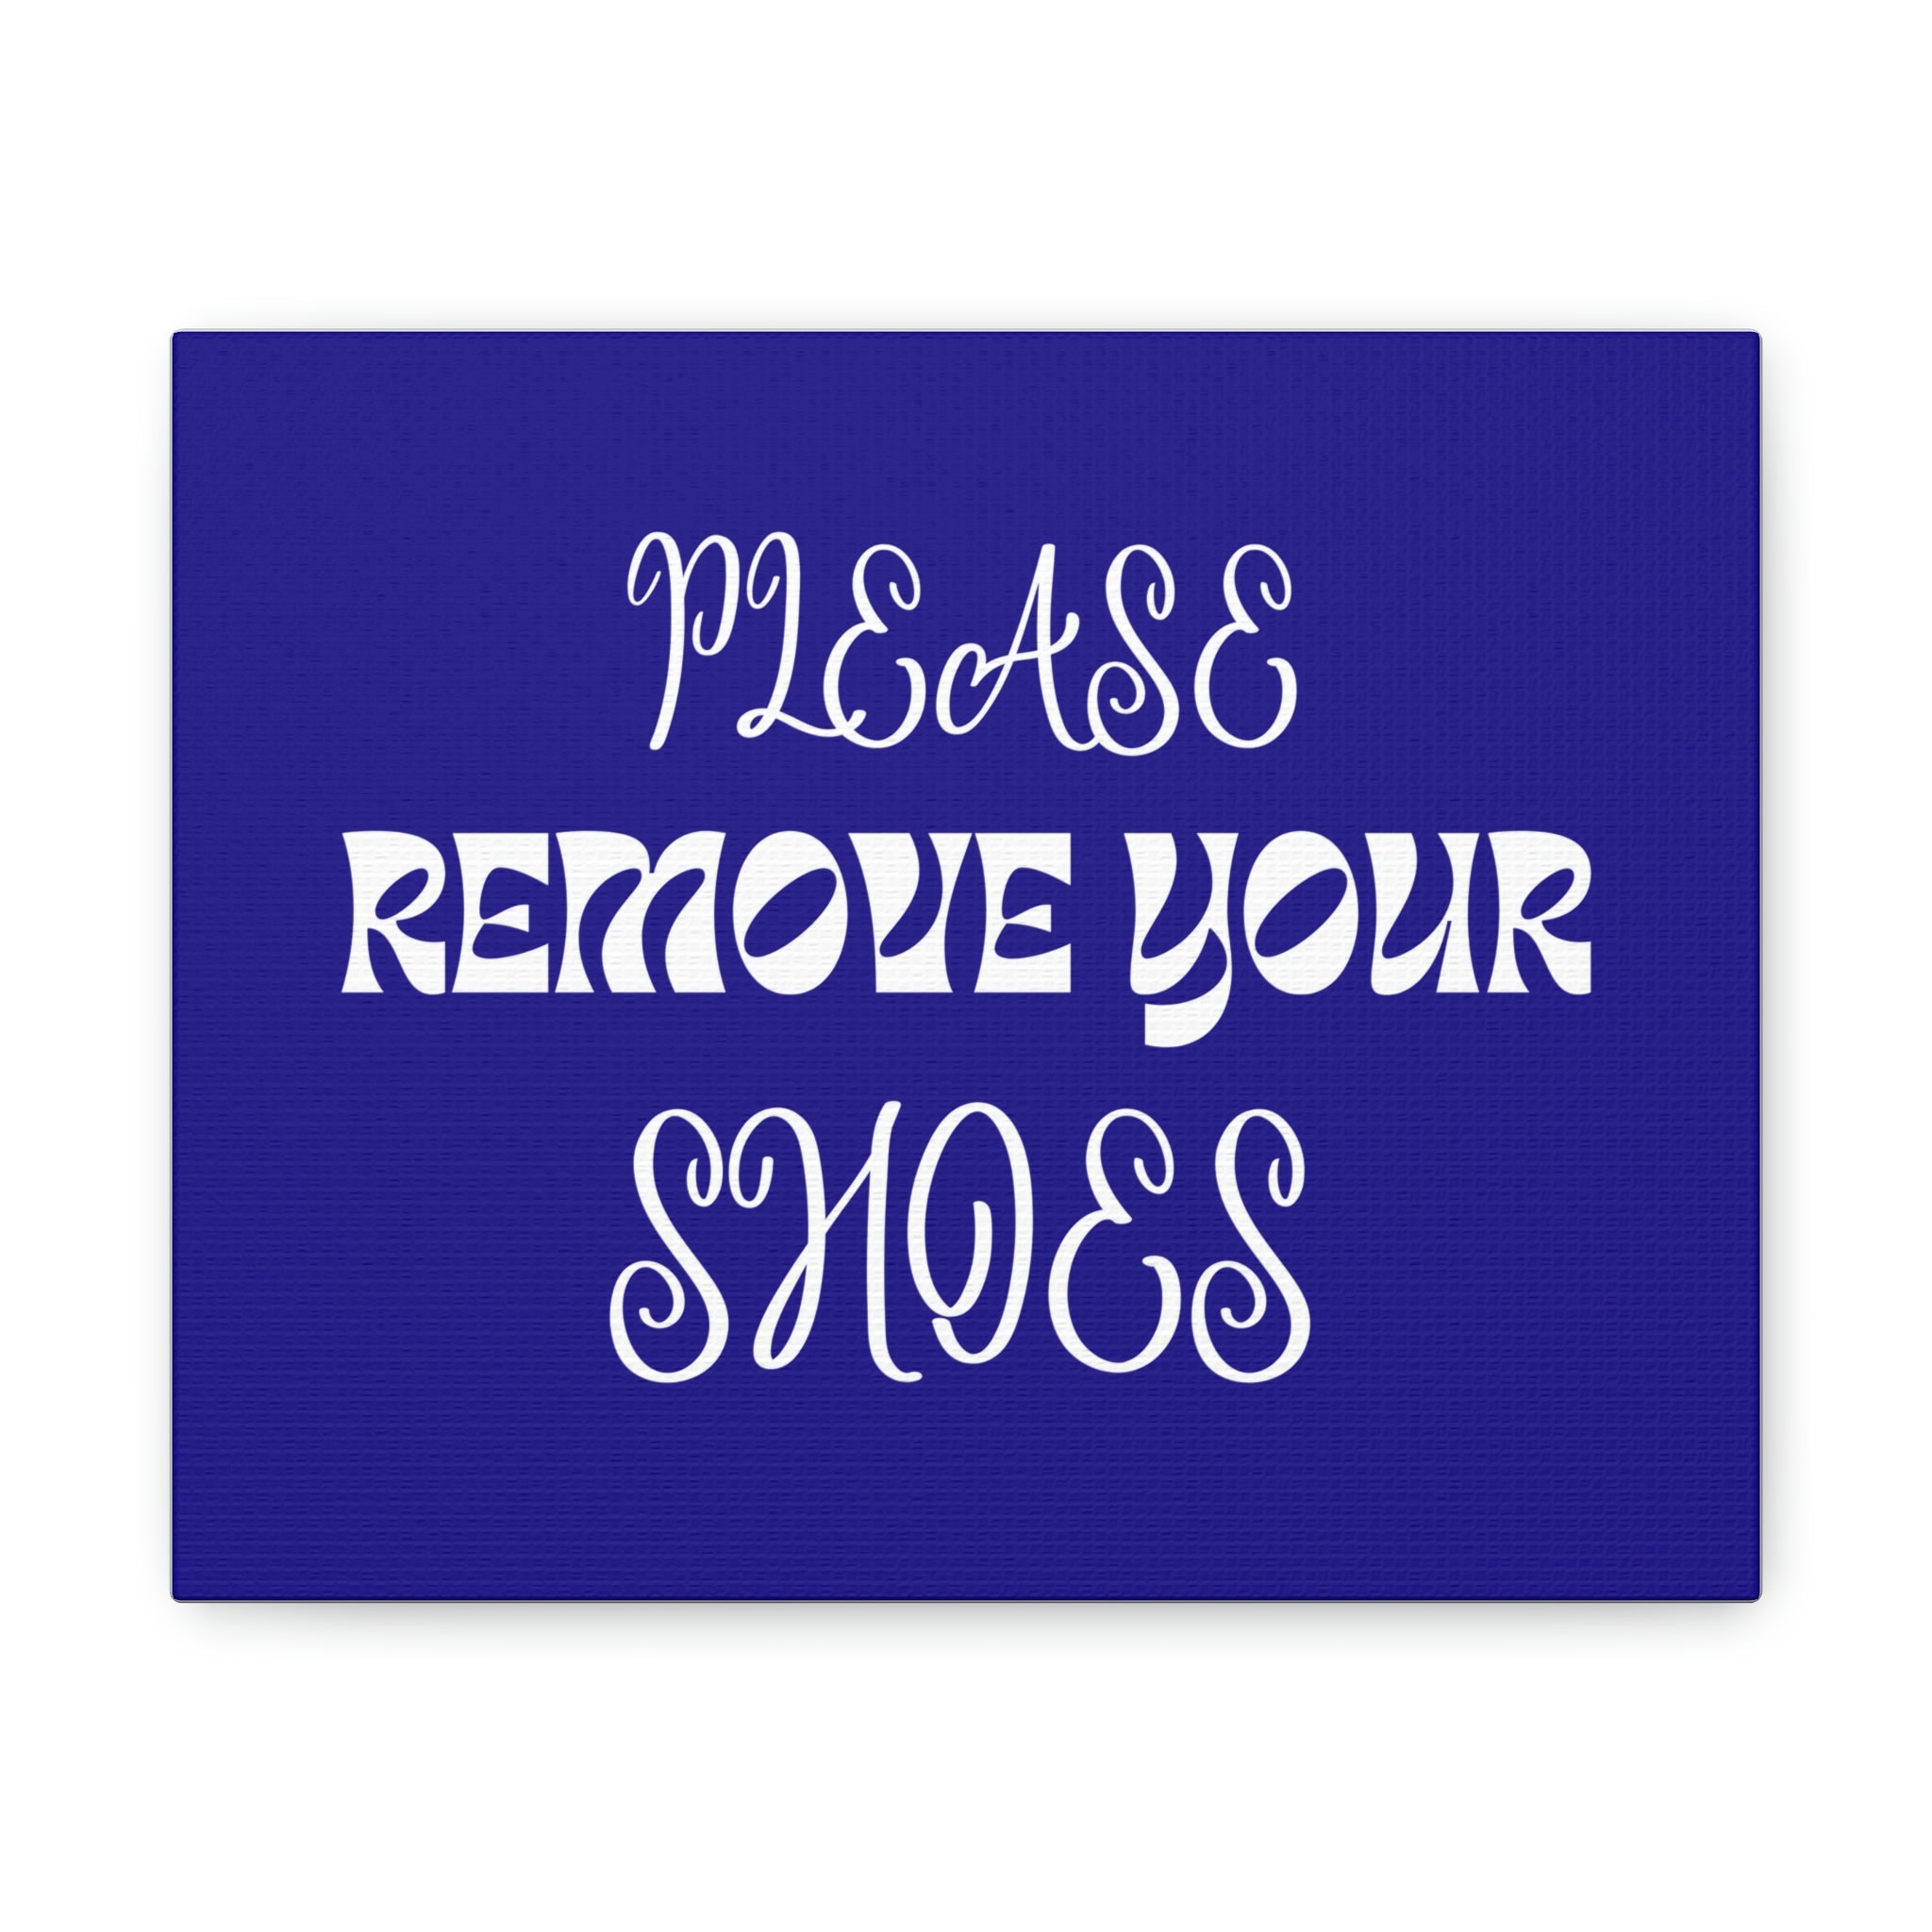 Please Remove Your Shoes 10" x 8" Canvas Gallery Wraps (If you'd like another color or have different wording please just let me know)